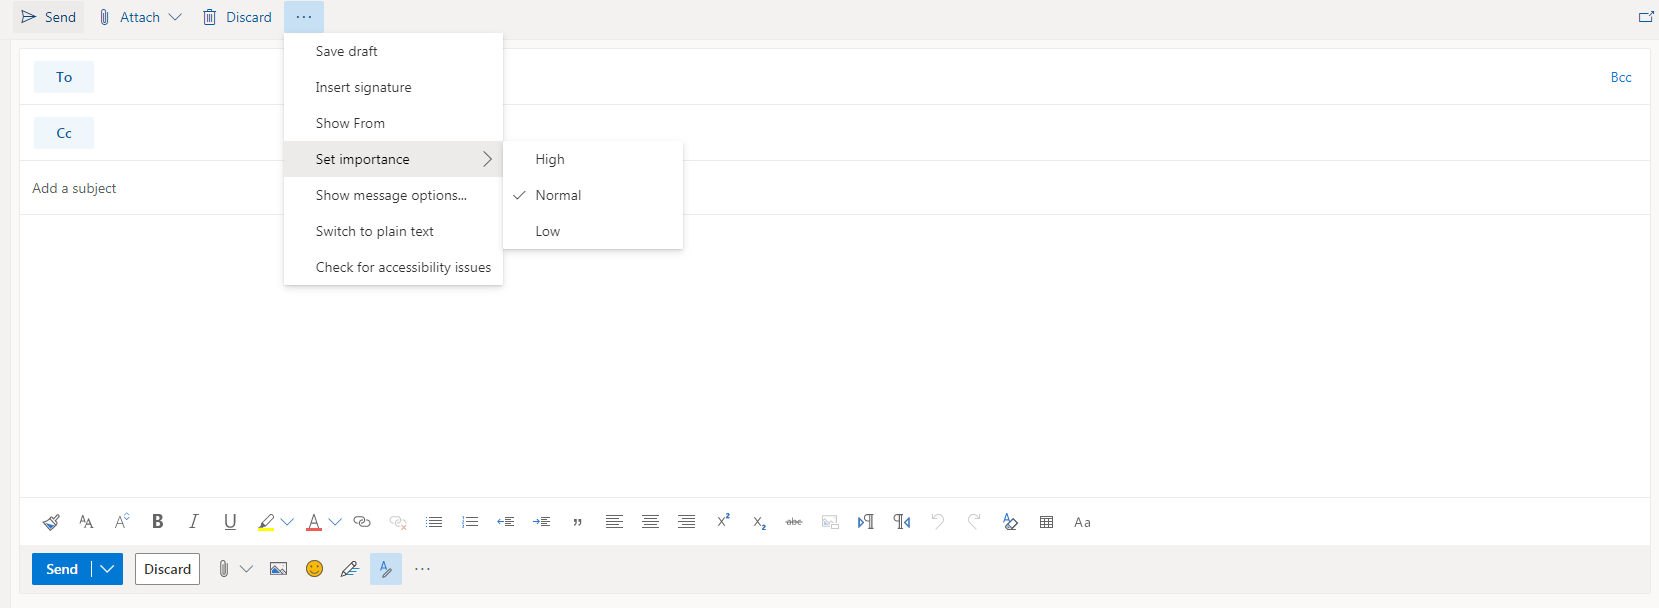 screenshot of email compose screen in Outlook